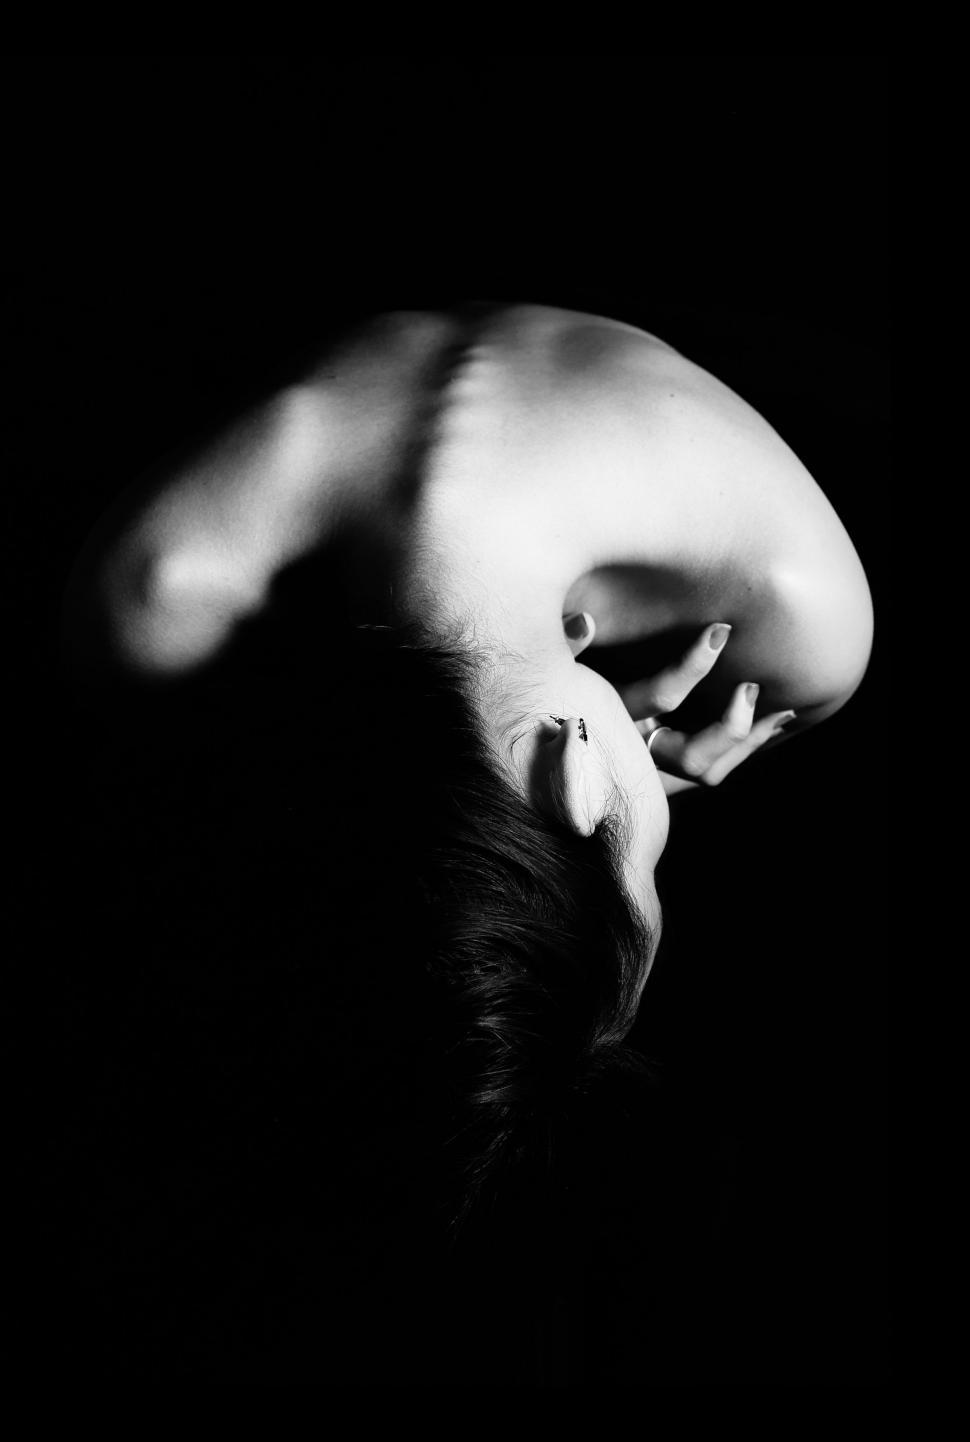 Free Image of Woman Upside Down in Black and White 